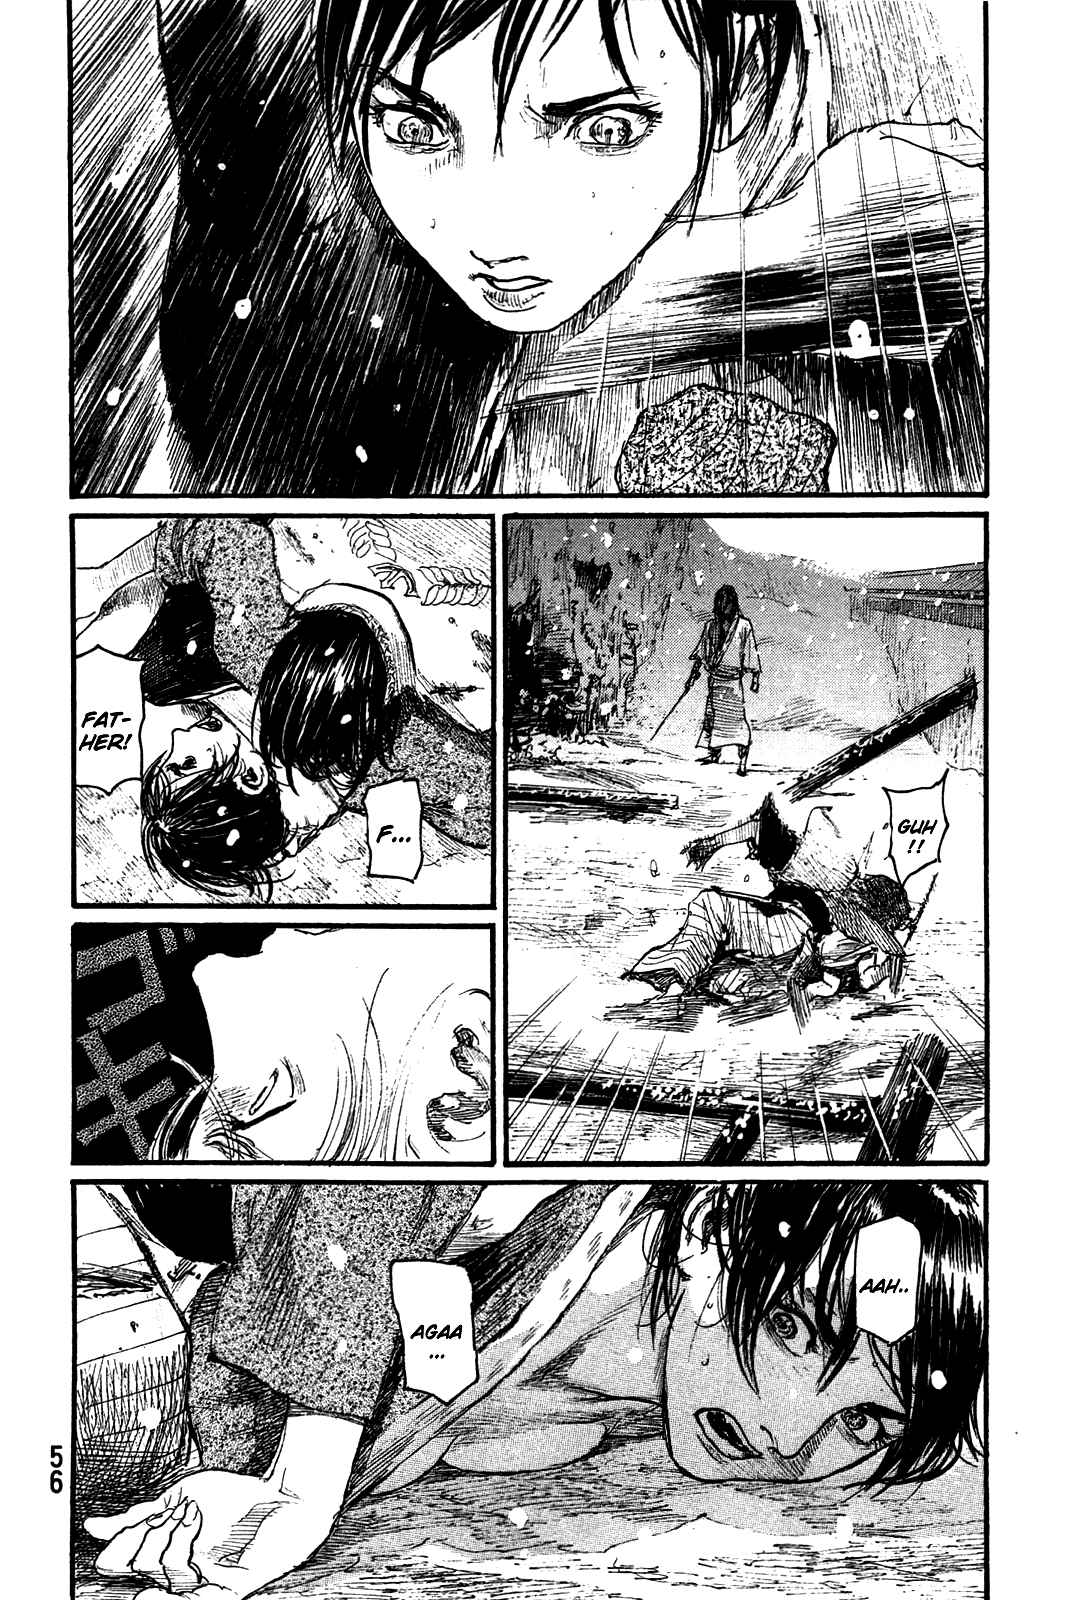 Blade of the Immortal Vol. 30 Ch. 199 Glorious Death in Winter Thunder (Part 1)